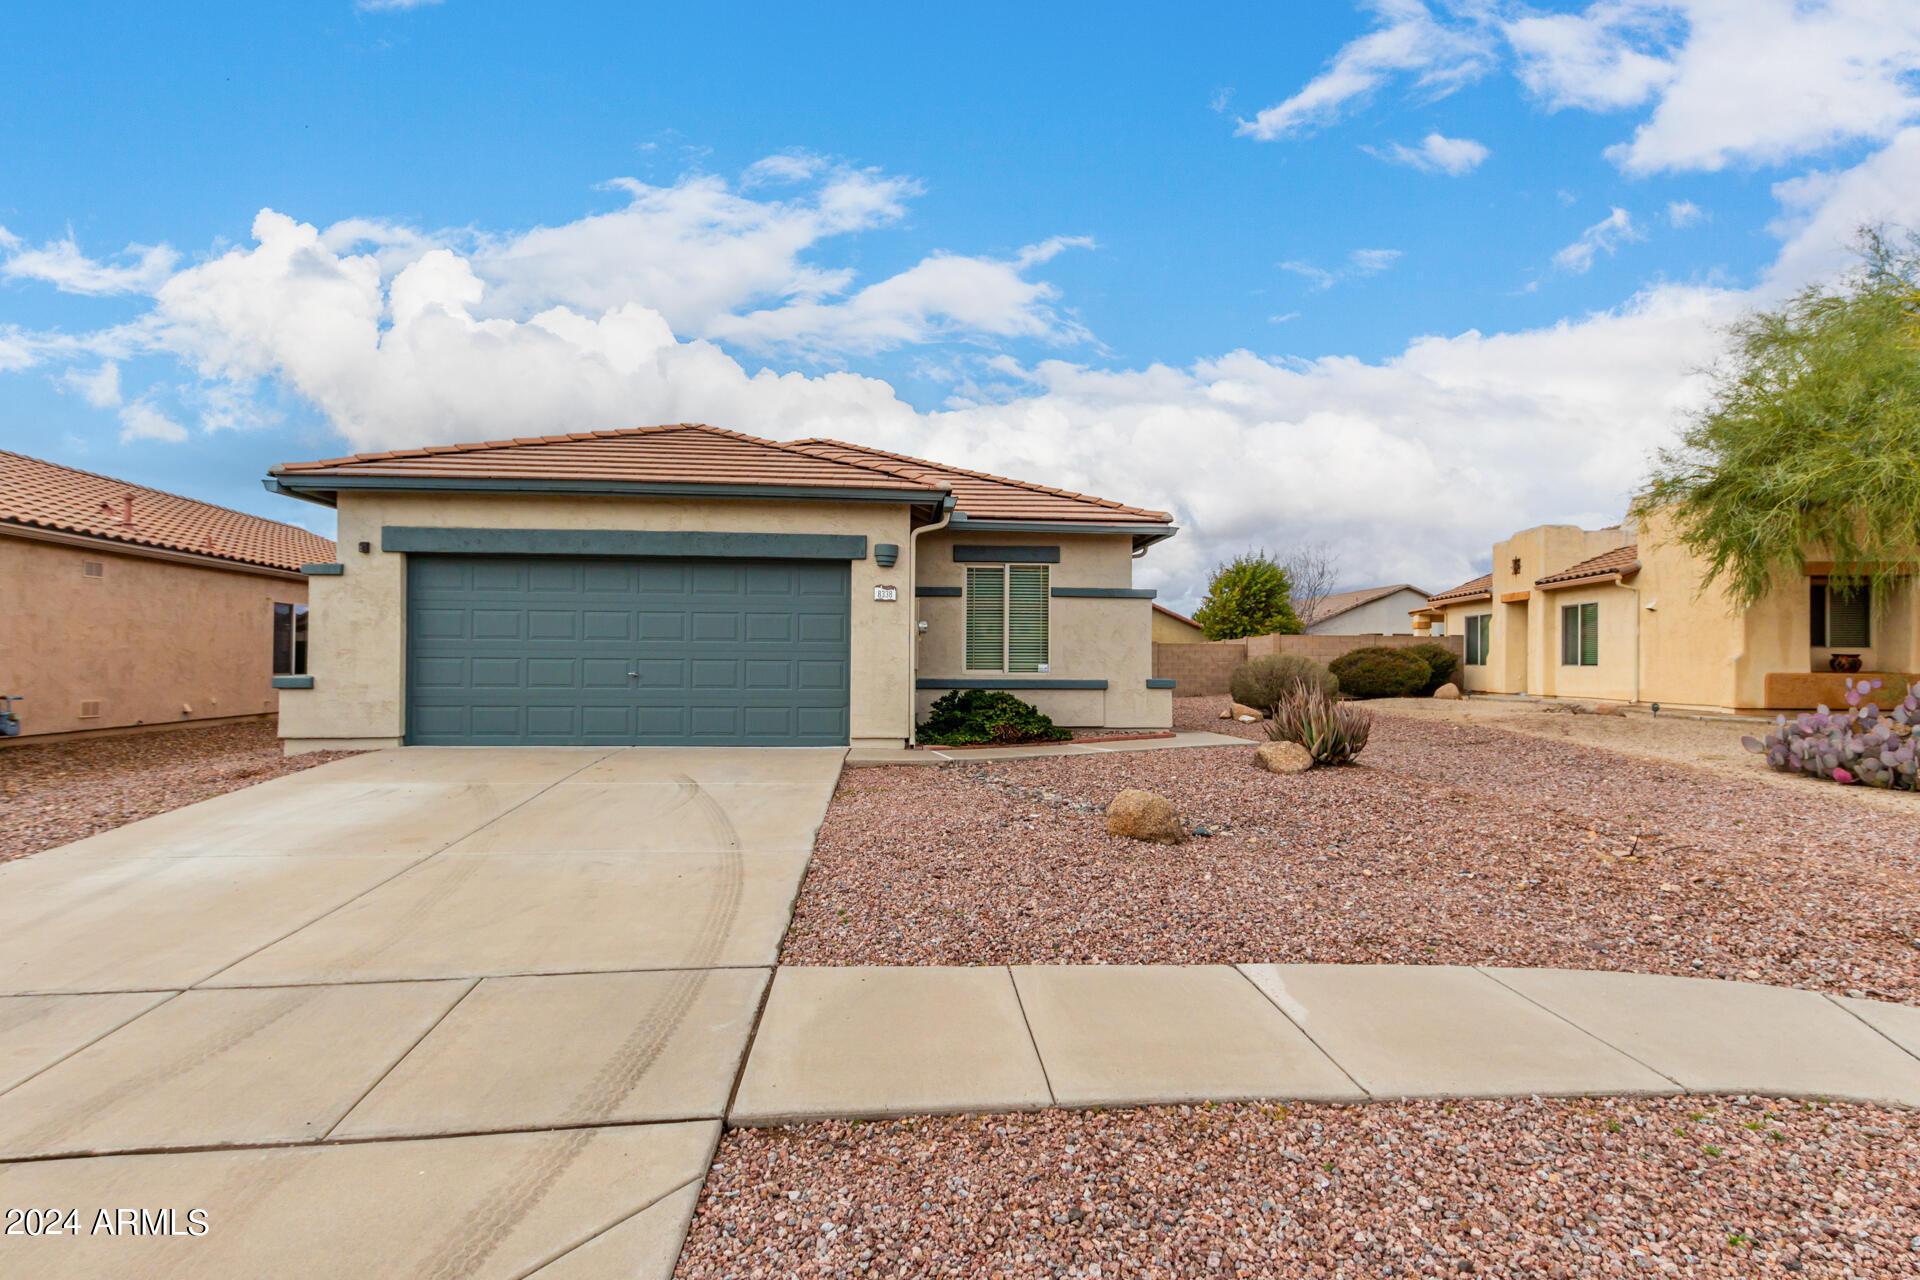 Photo one of 8338 S Lost Mine Rd Gold Canyon AZ 85118 | MLS 6647863